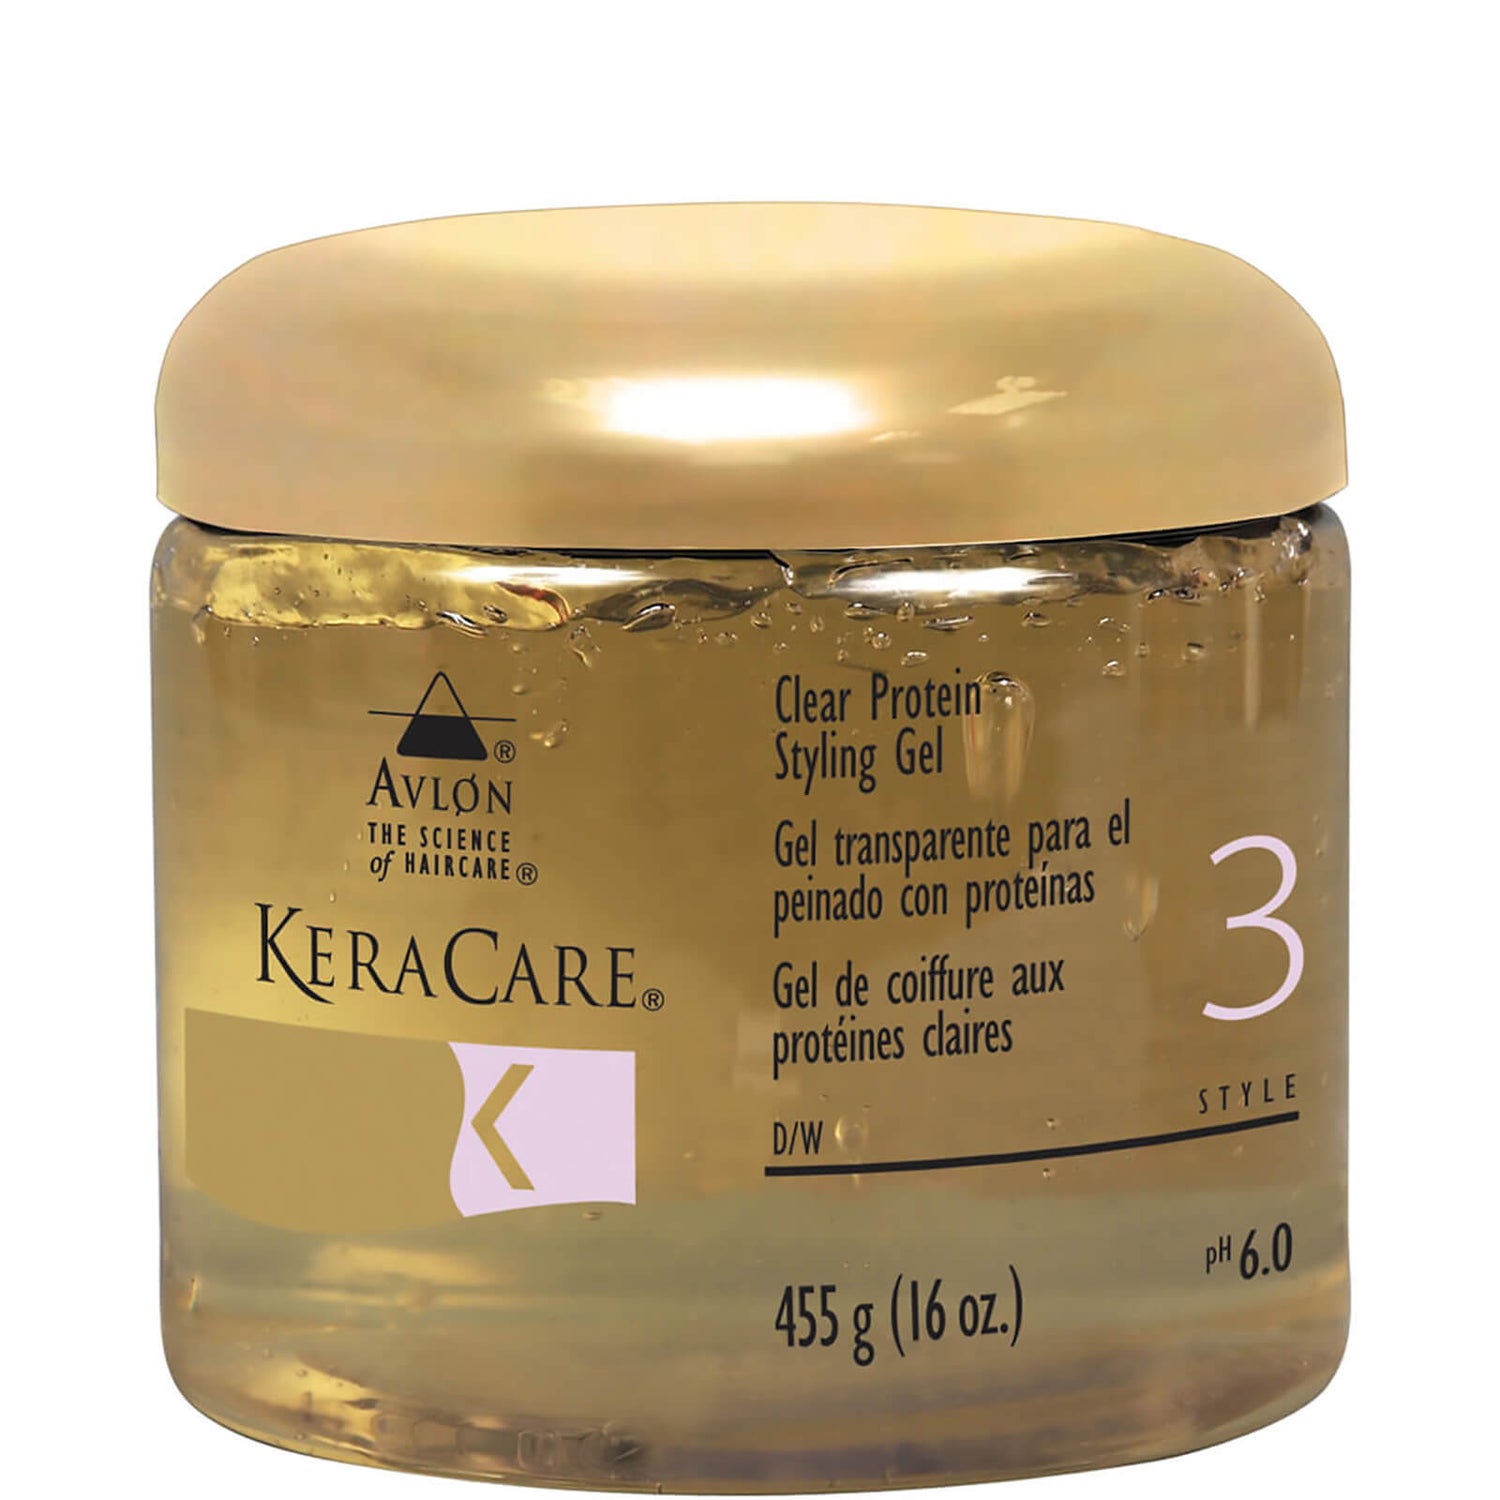 KeraCare Gel Styling alle Proteine (Chiaro) (450g / 16 once)